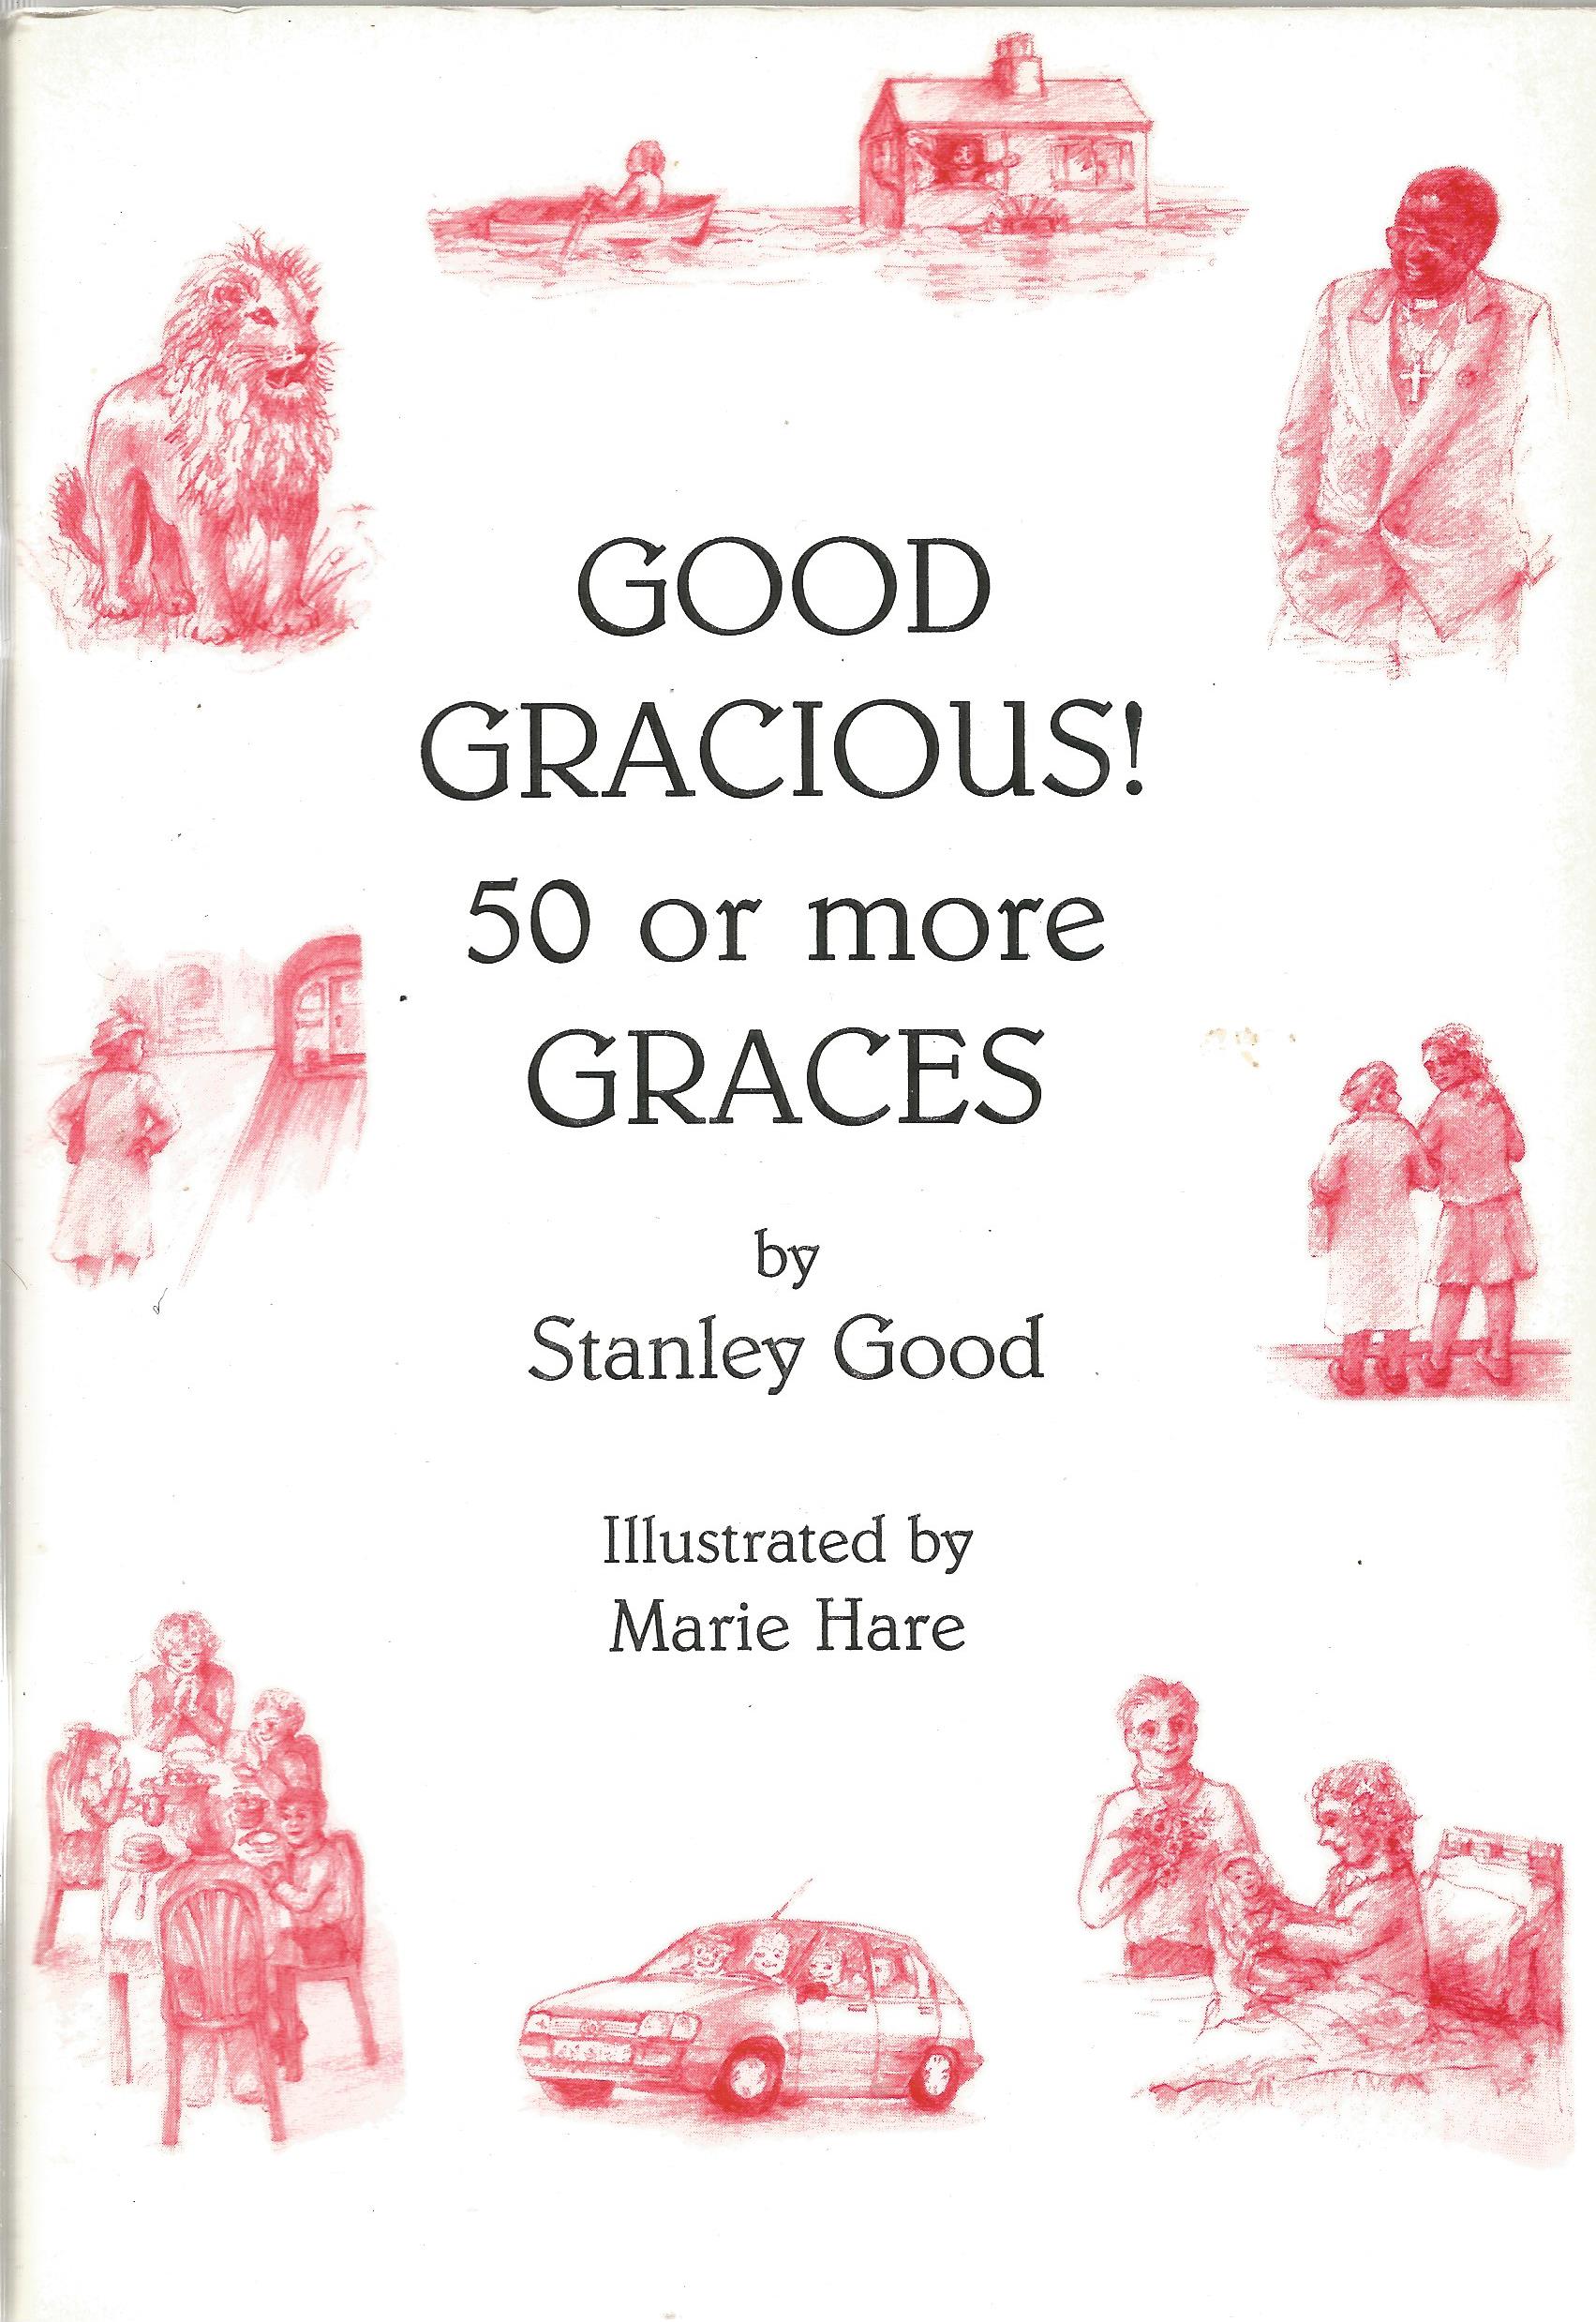 Stanley Good Signed softback book Good Gracious! - 50 or more Graces 2002 published by Emprint